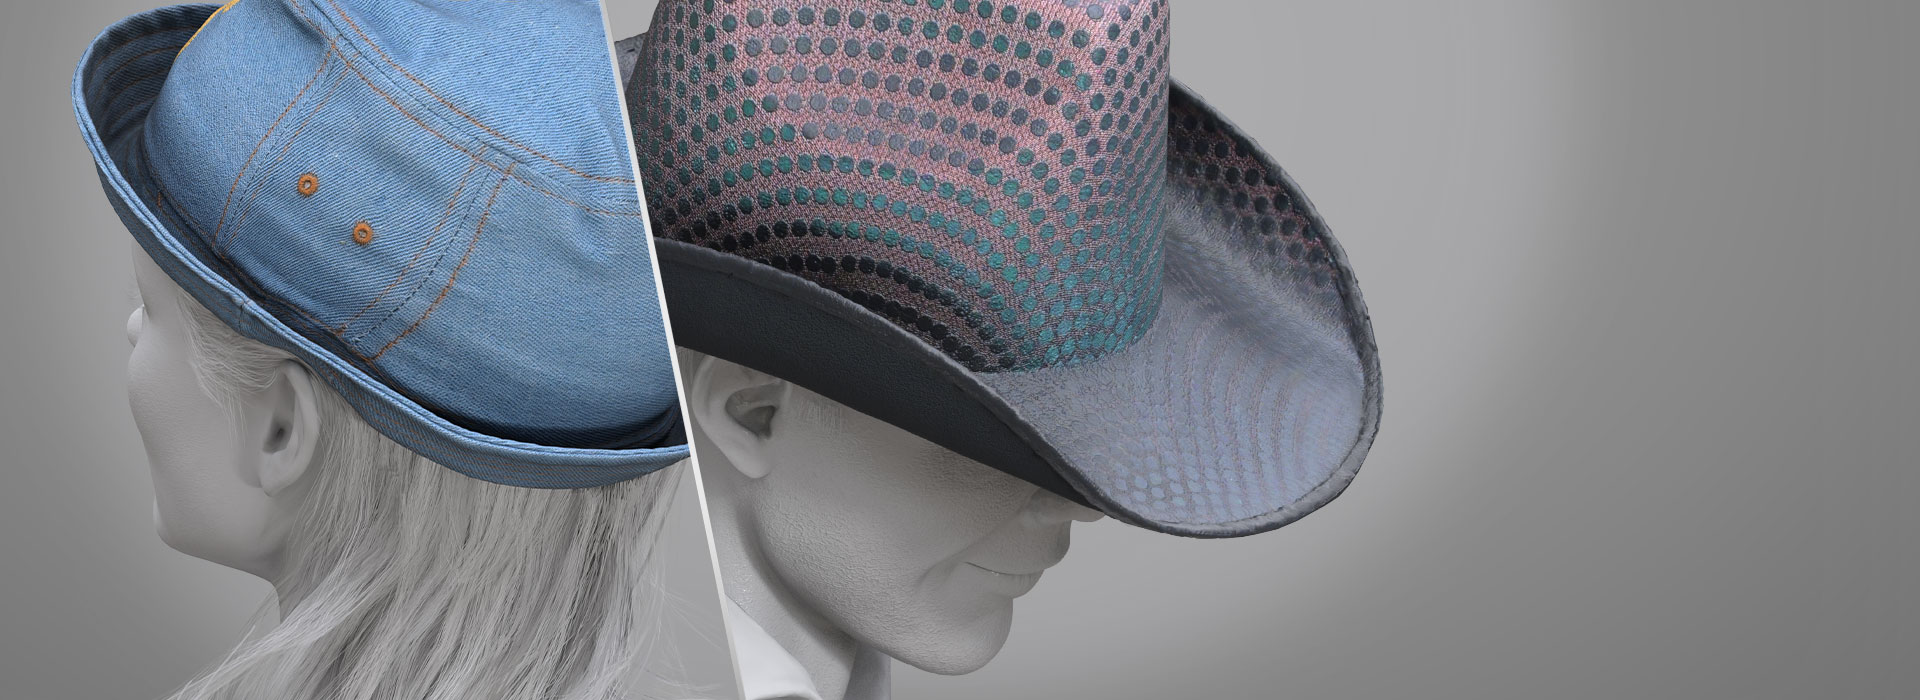 3d scan hats-edgy hat collection